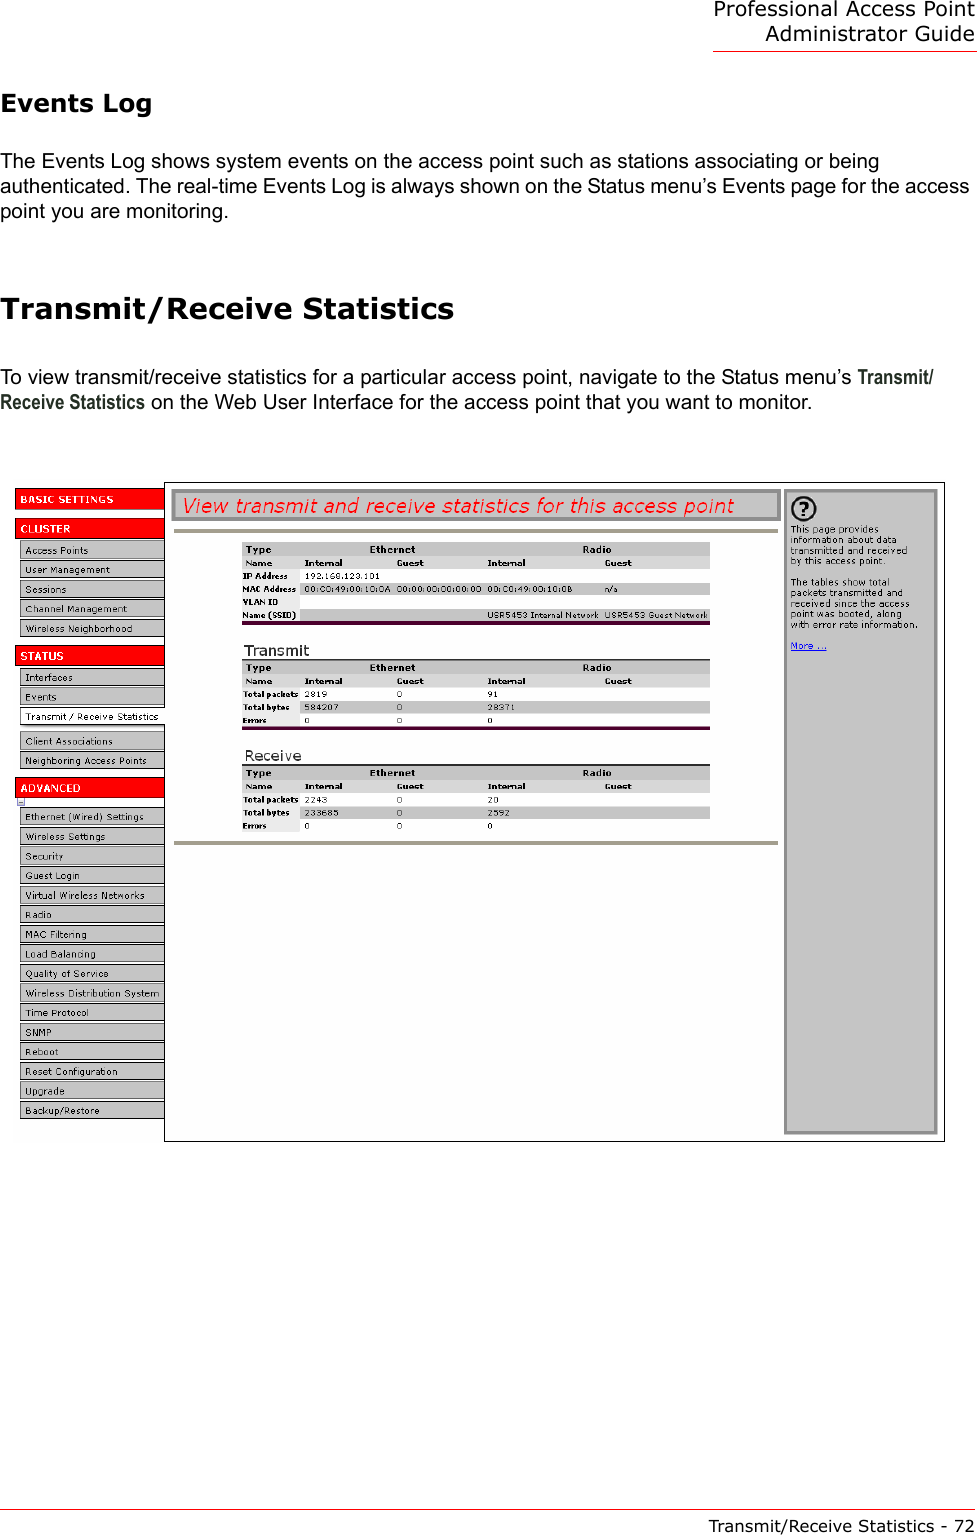 Professional Access Point Administrator GuideTransmit/Receive Statistics - 72Events LogThe Events Log shows system events on the access point such as stations associating or being authenticated. The real-time Events Log is always shown on the Status menu’s Events page for the access point you are monitoring.Transmit/Receive StatisticsTo view transmit/receive statistics for a particular access point, navigate to the Status menu’s Transmit/Receive Statistics on the Web User Interface for the access point that you want to monitor.